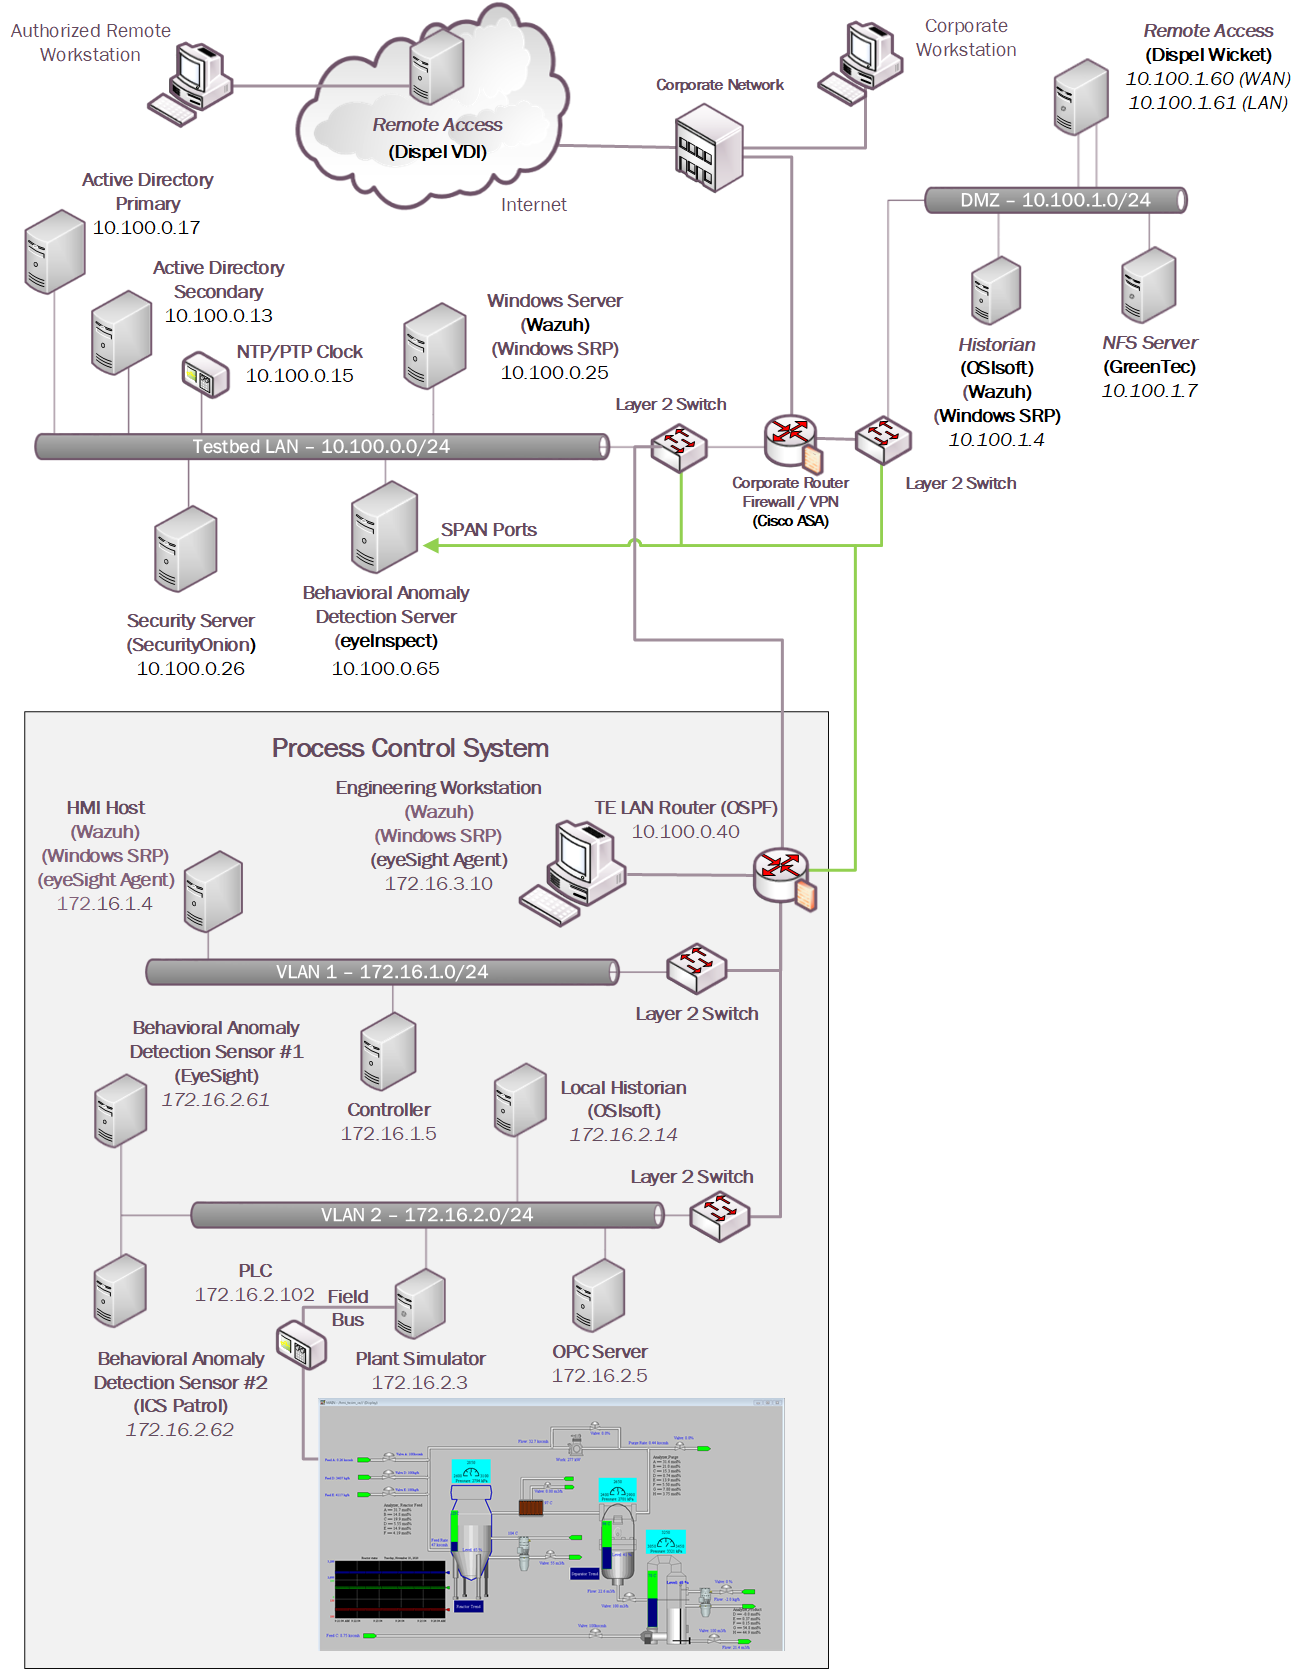 Architecture Diagram of Build 2. Build 2 uses the Process Control System with the following products: Security Onion Wazuh, Dispel, GreenTec, OSIsoft, Windows SRP, and Forescout.